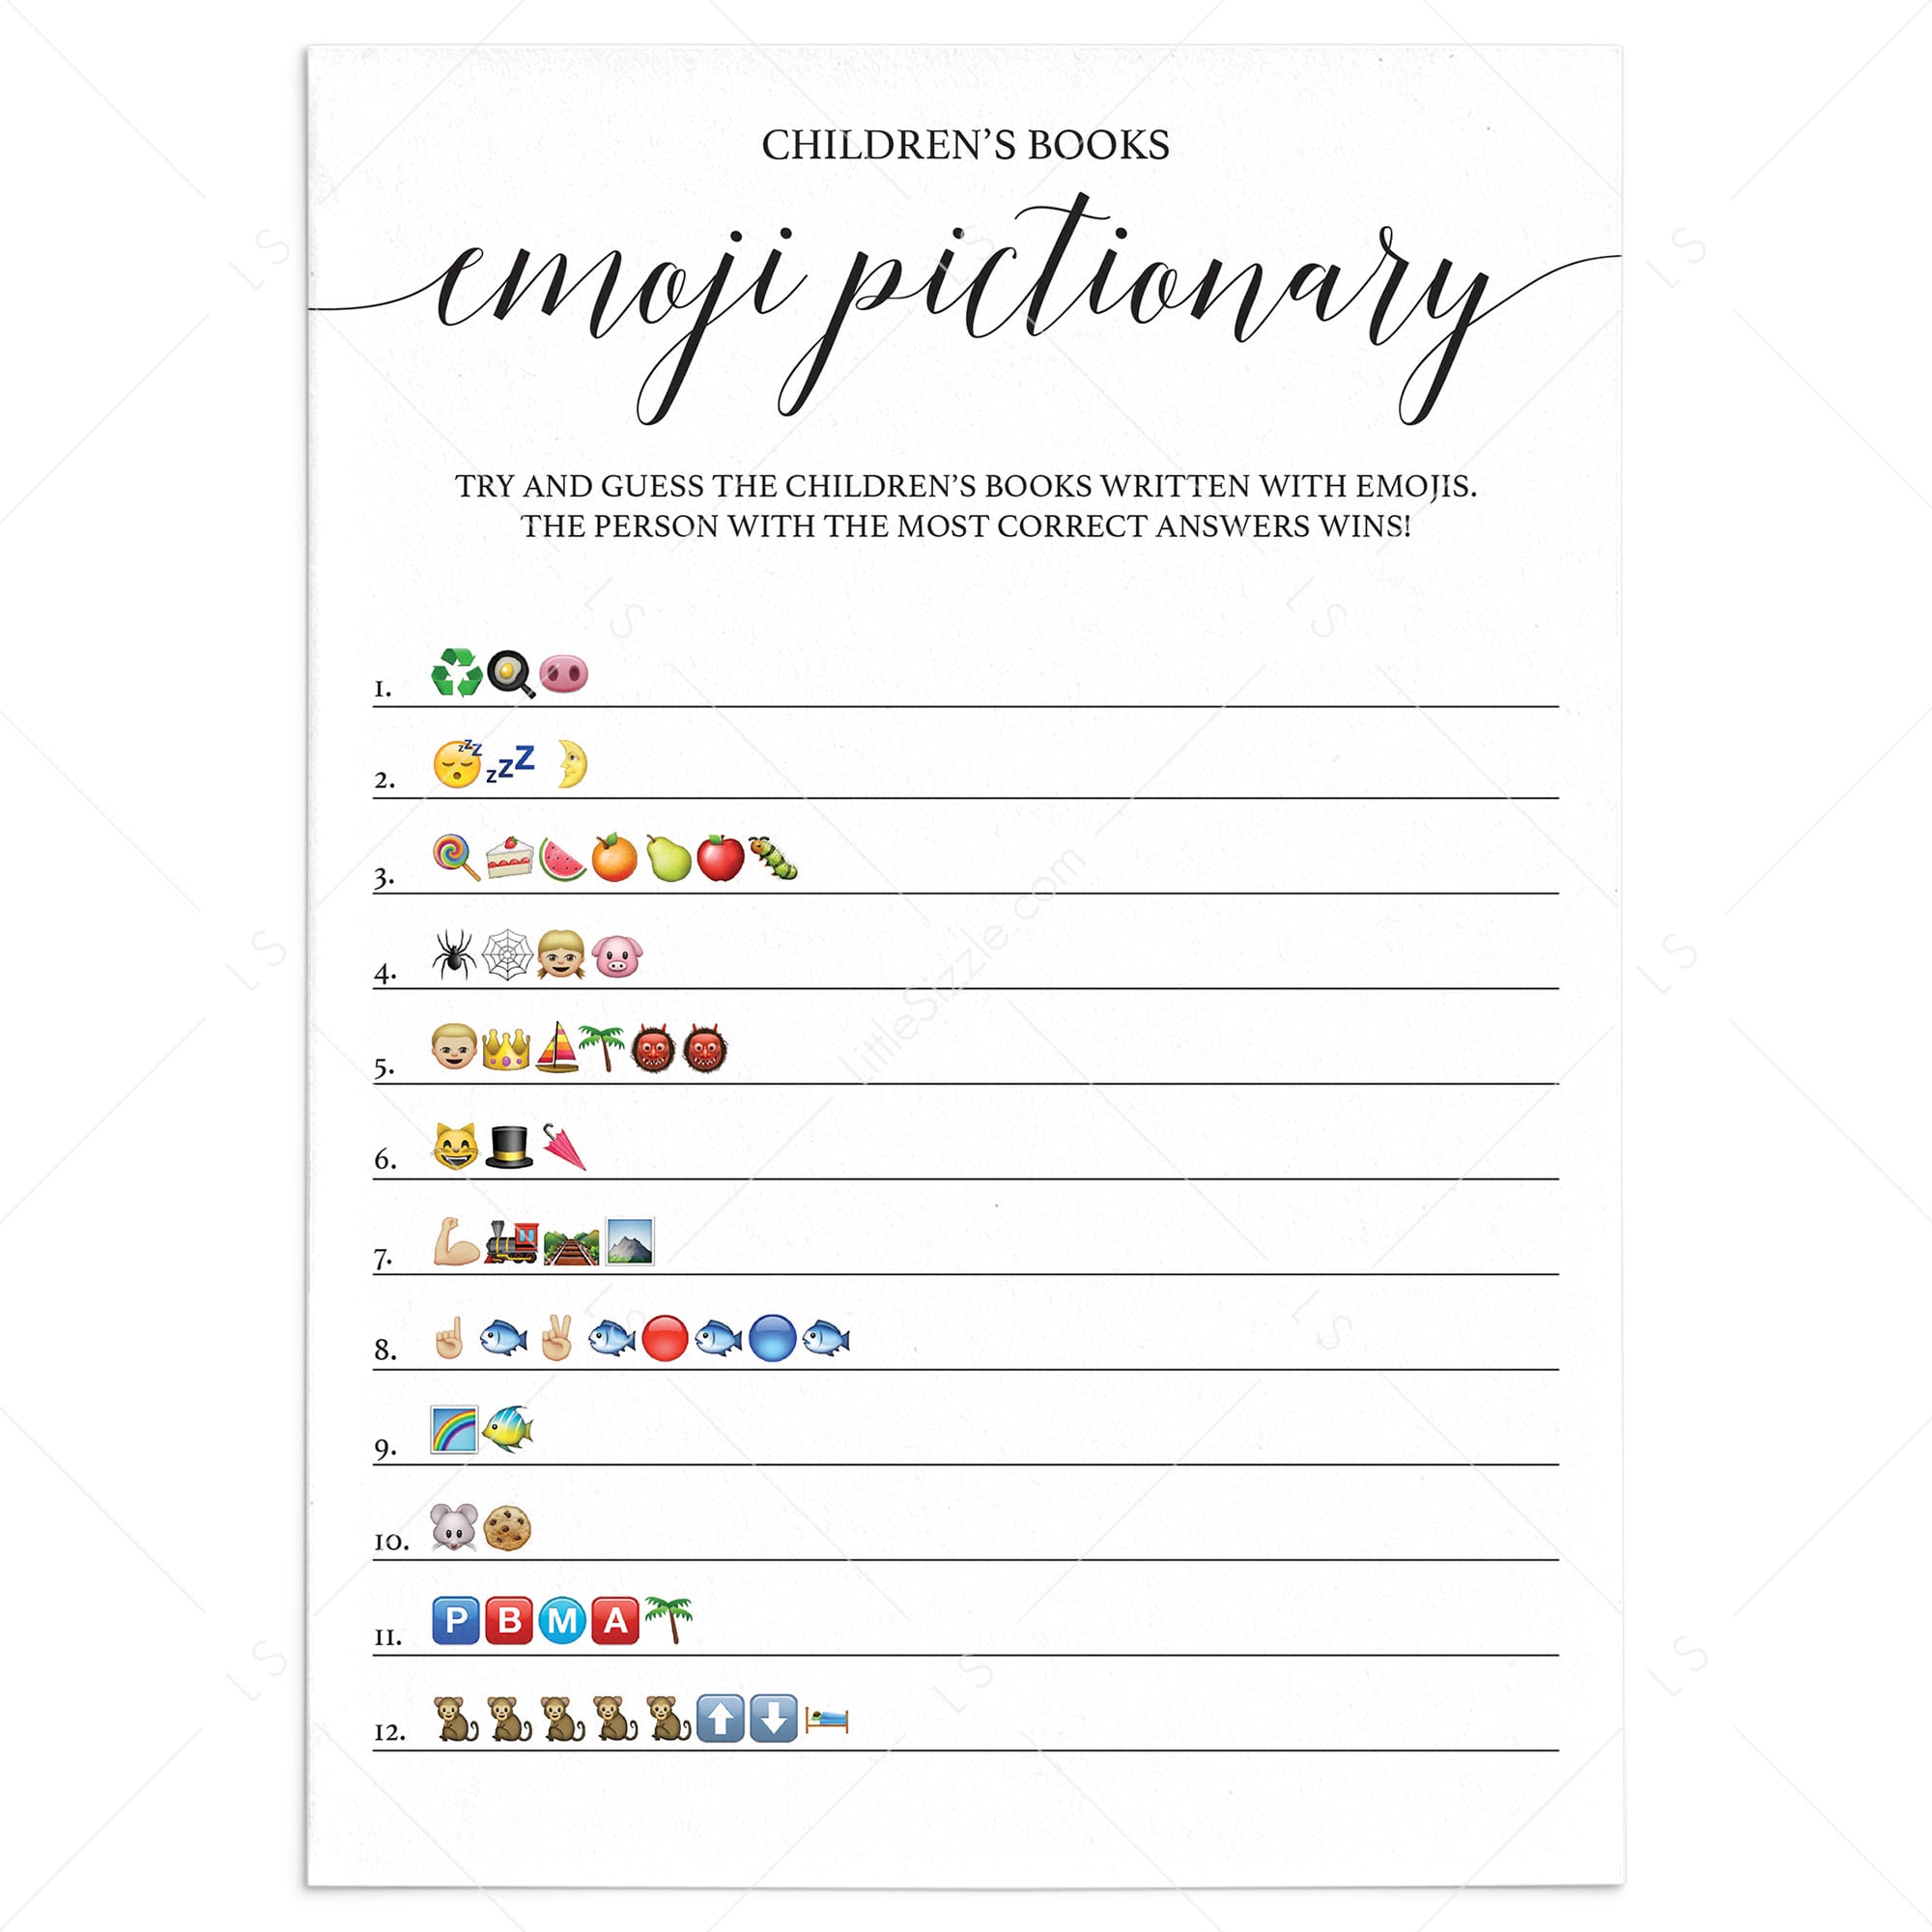 Baby shower emoji pictionary game printable by LittleSizzle